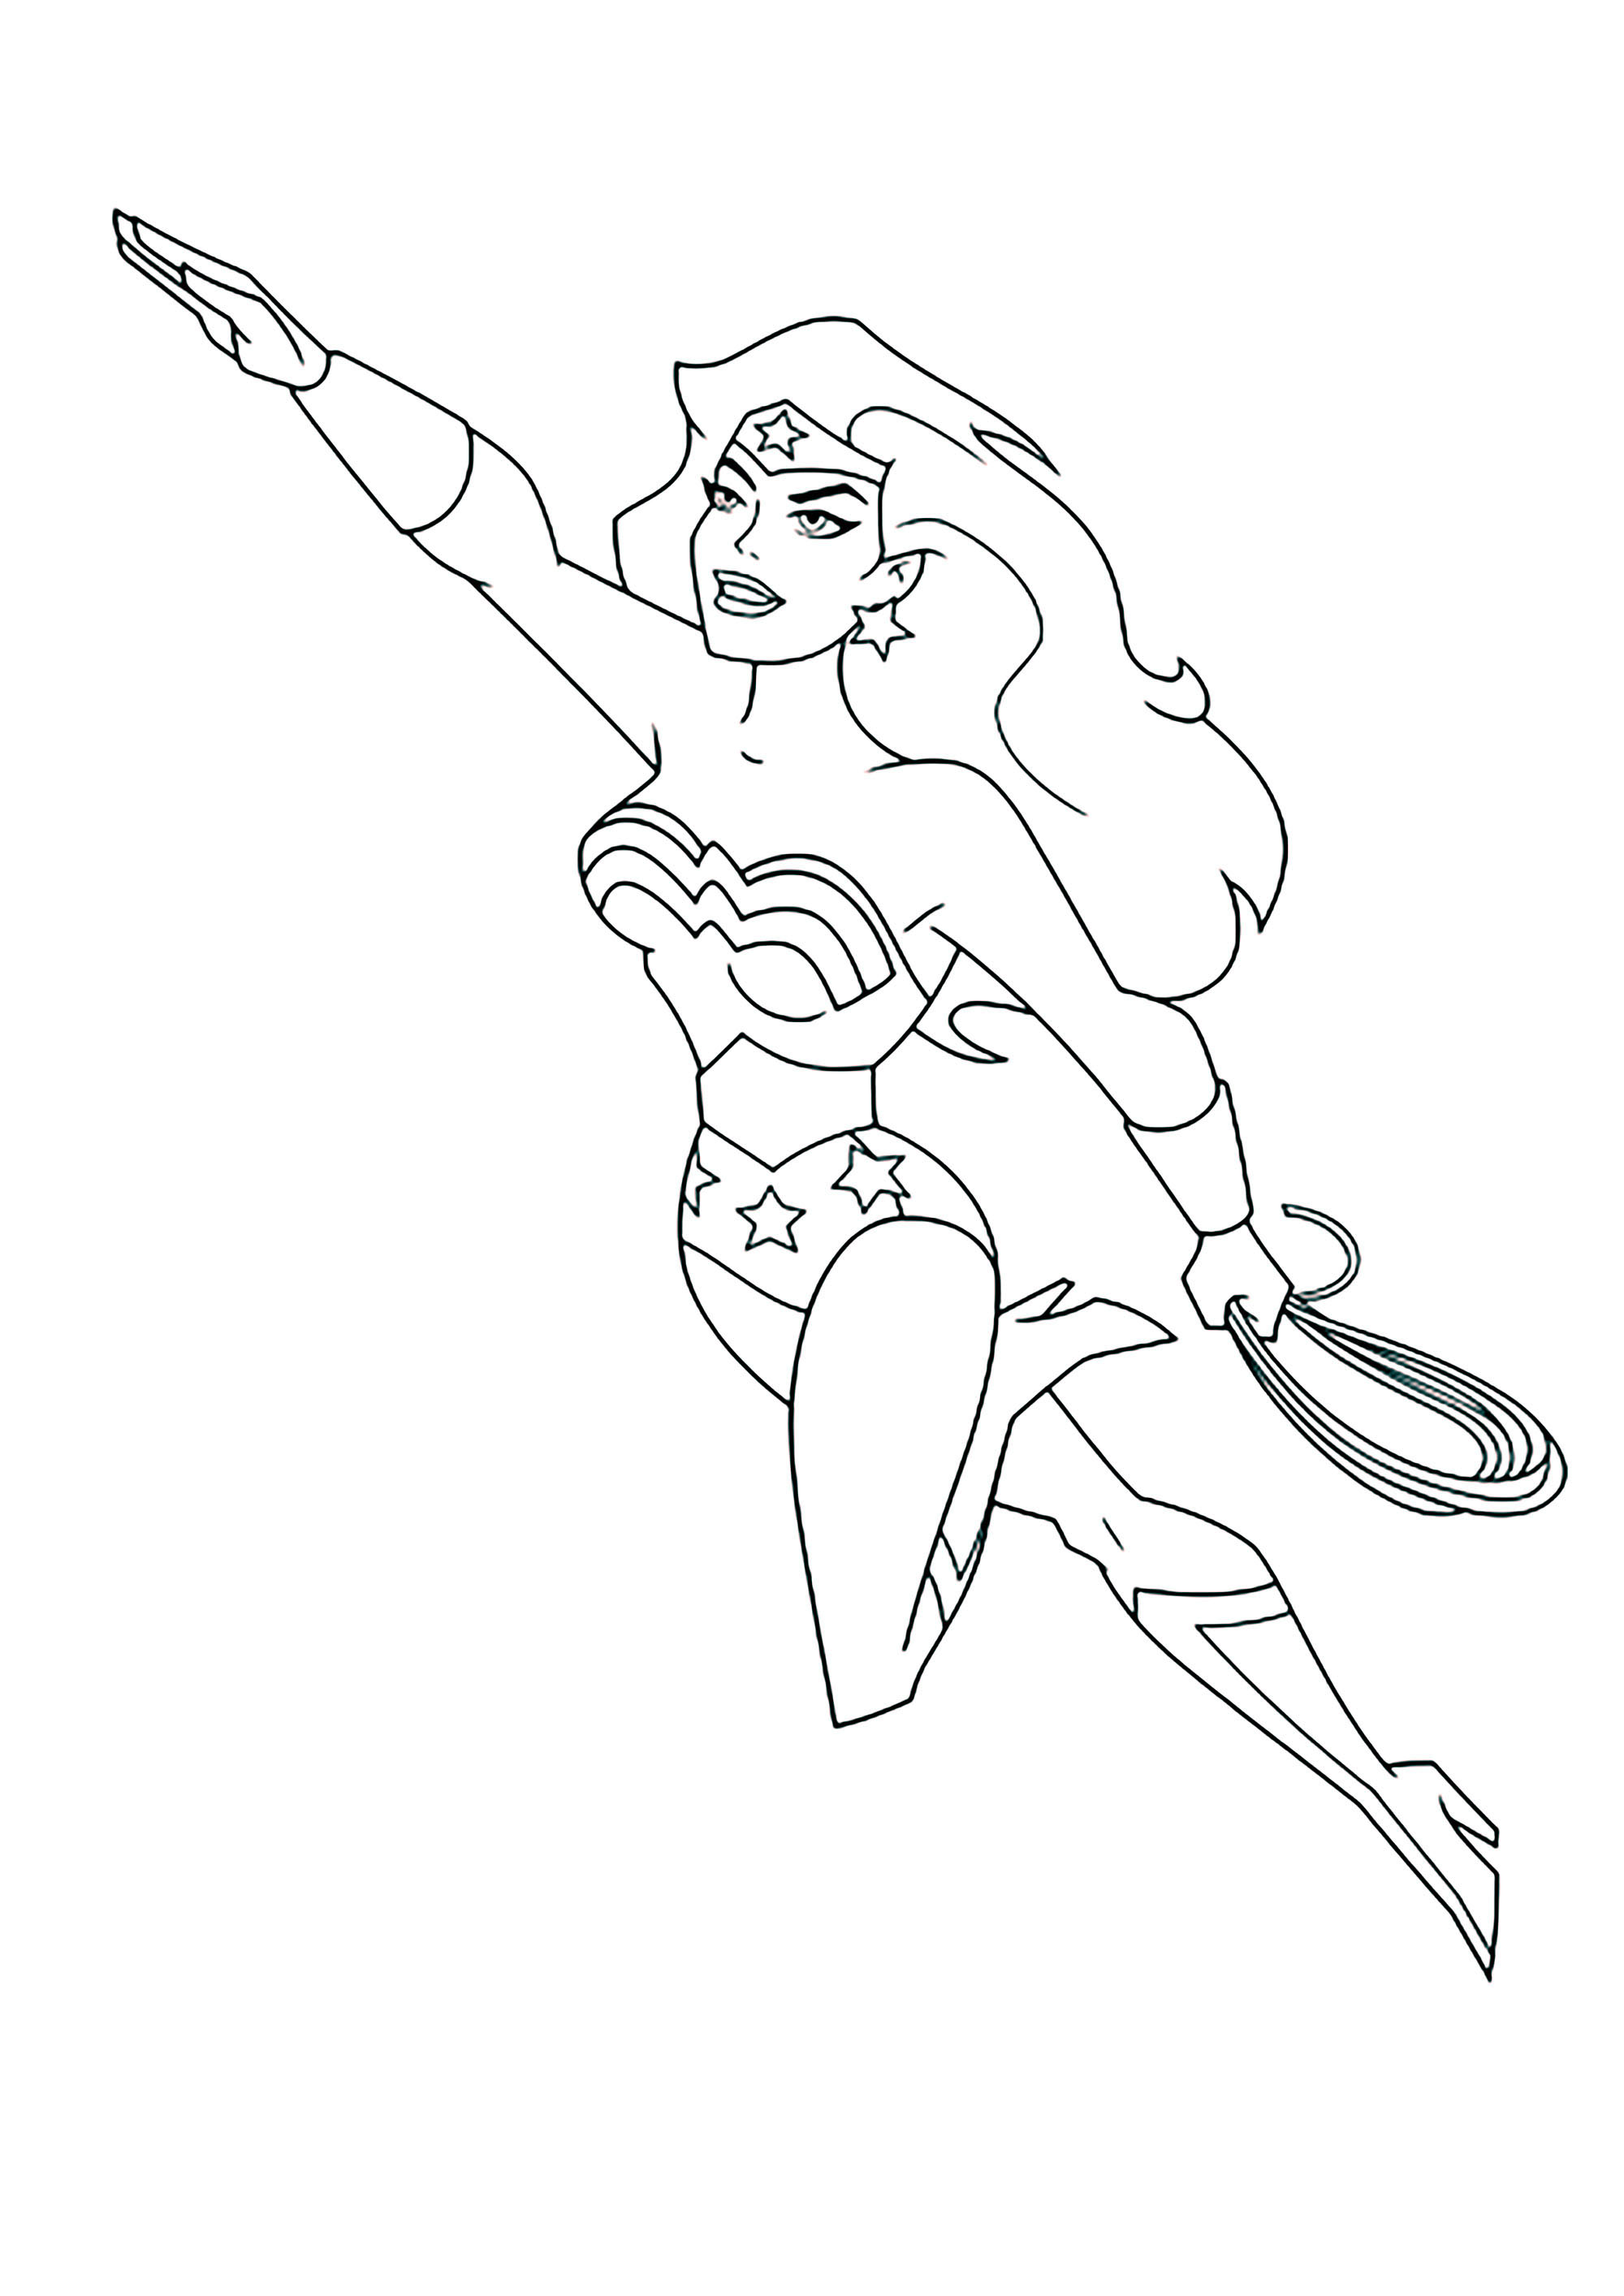 Wonder Woman Cartoon Coloring Pages